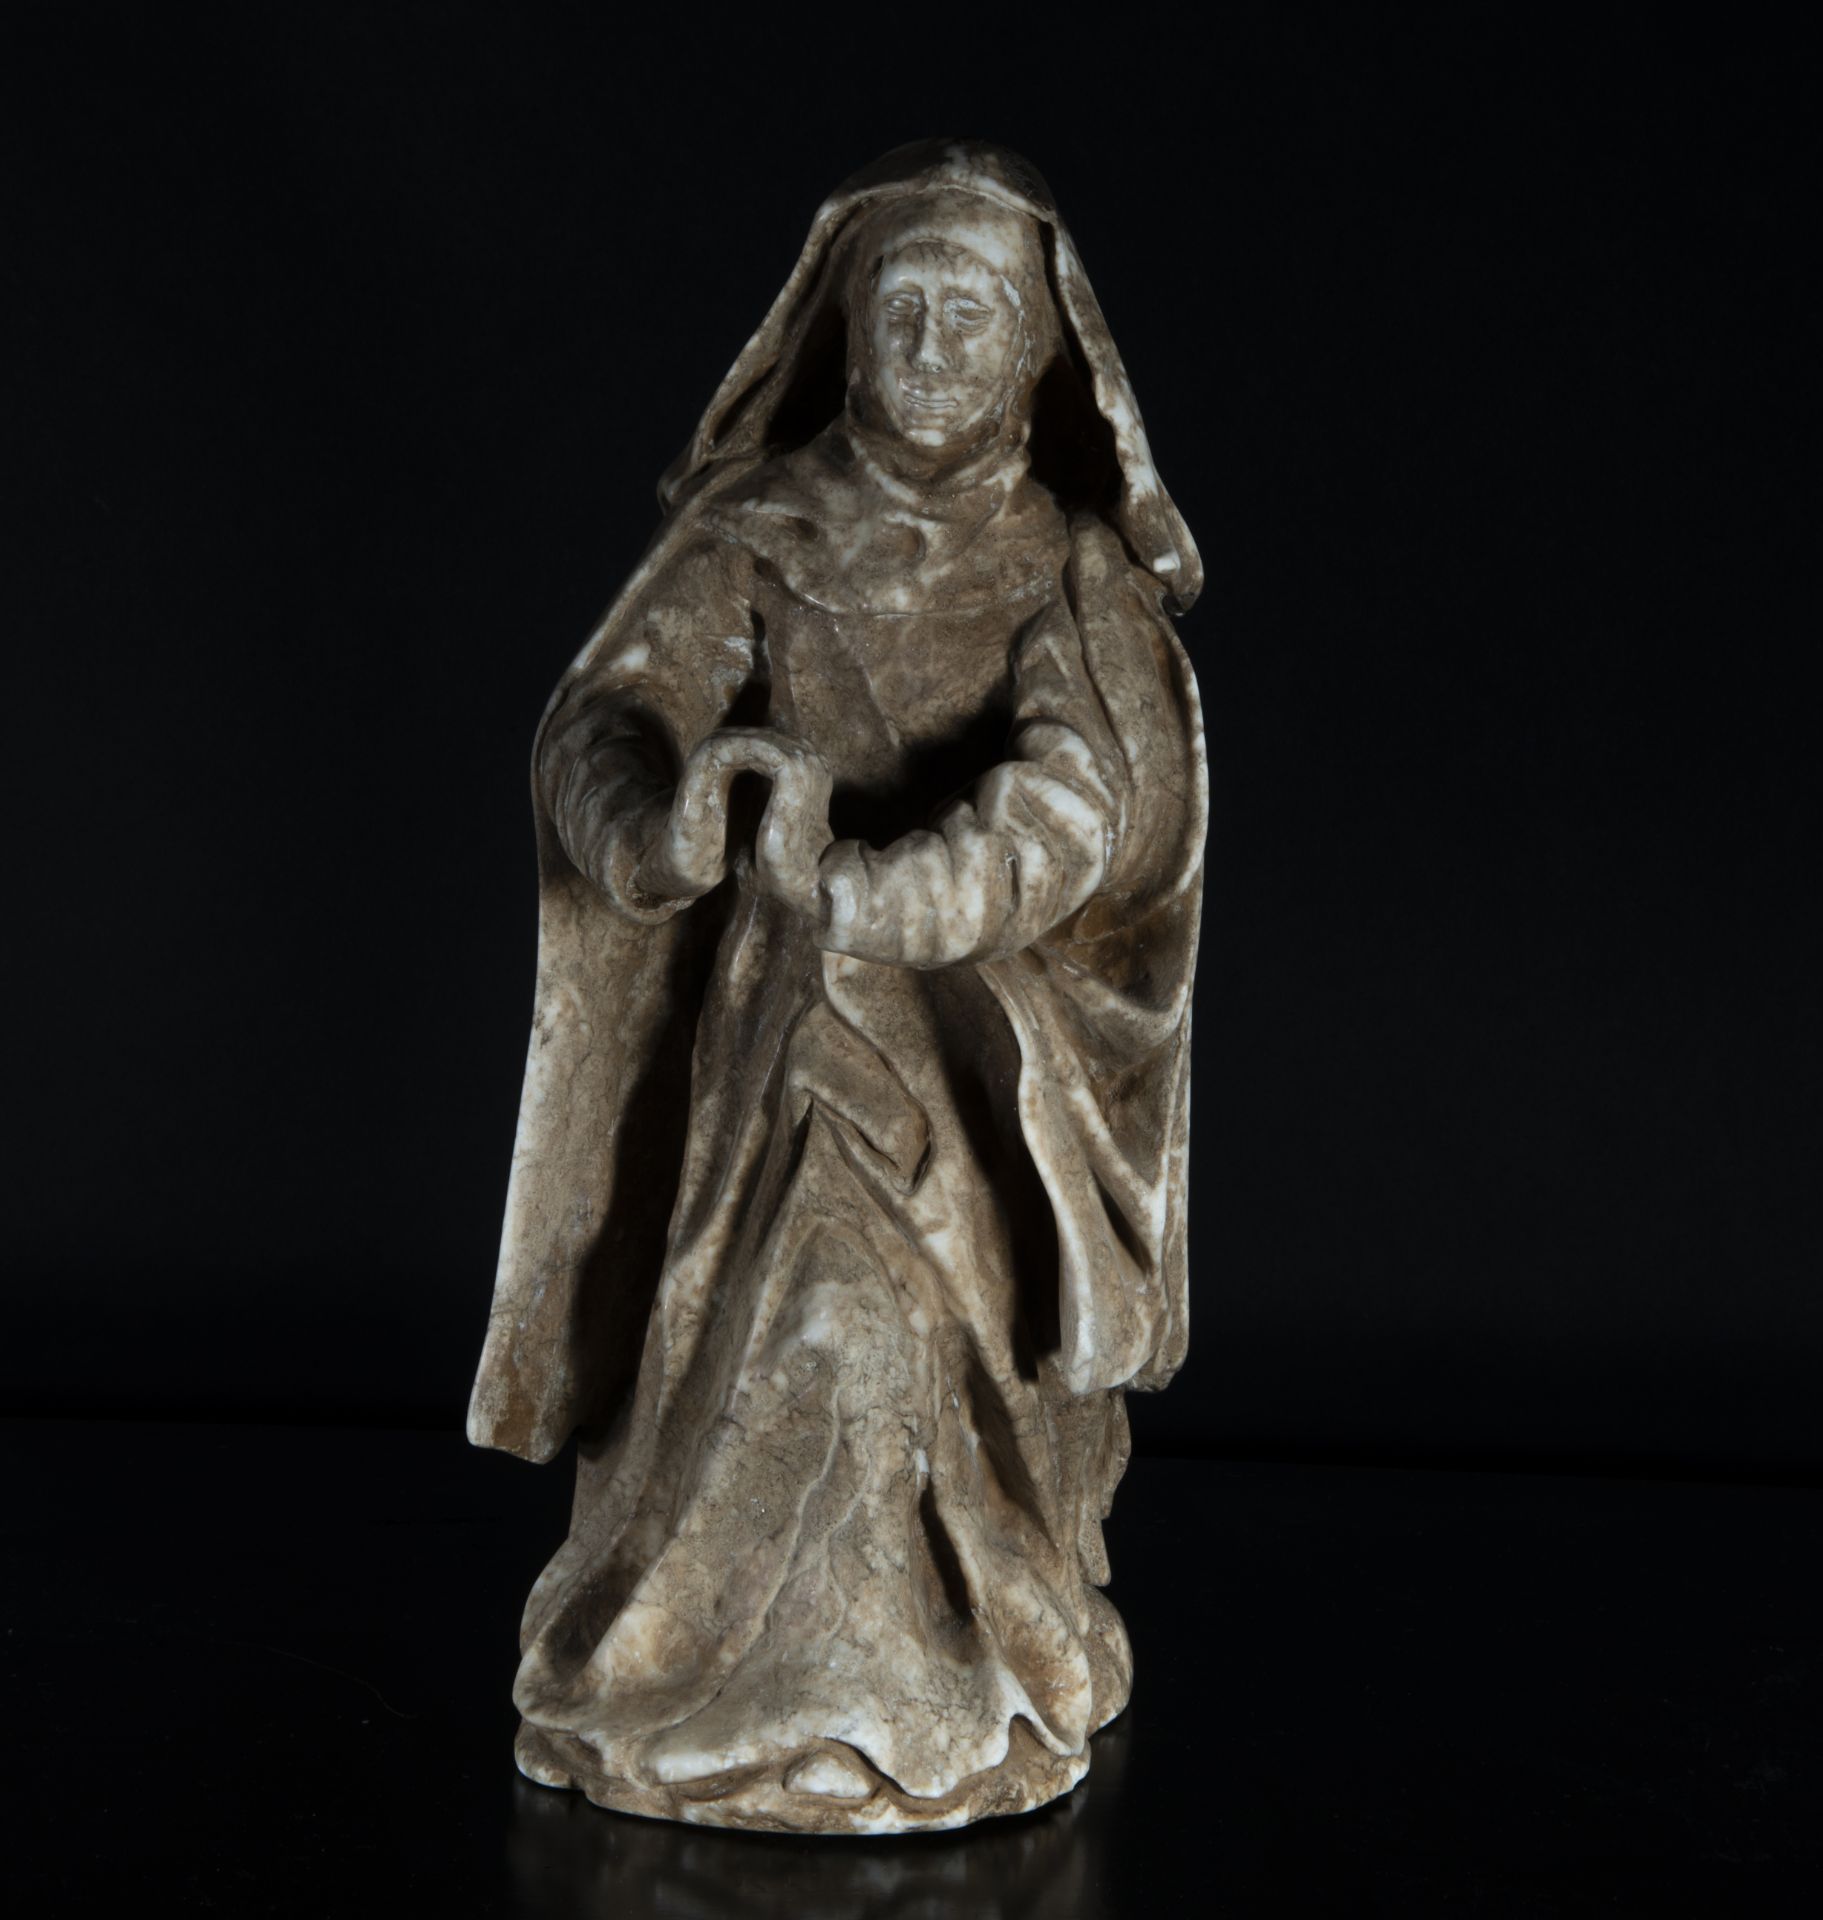 Portuguese Virgin in Alabaster carving, possibly 17th century, Portuguese work